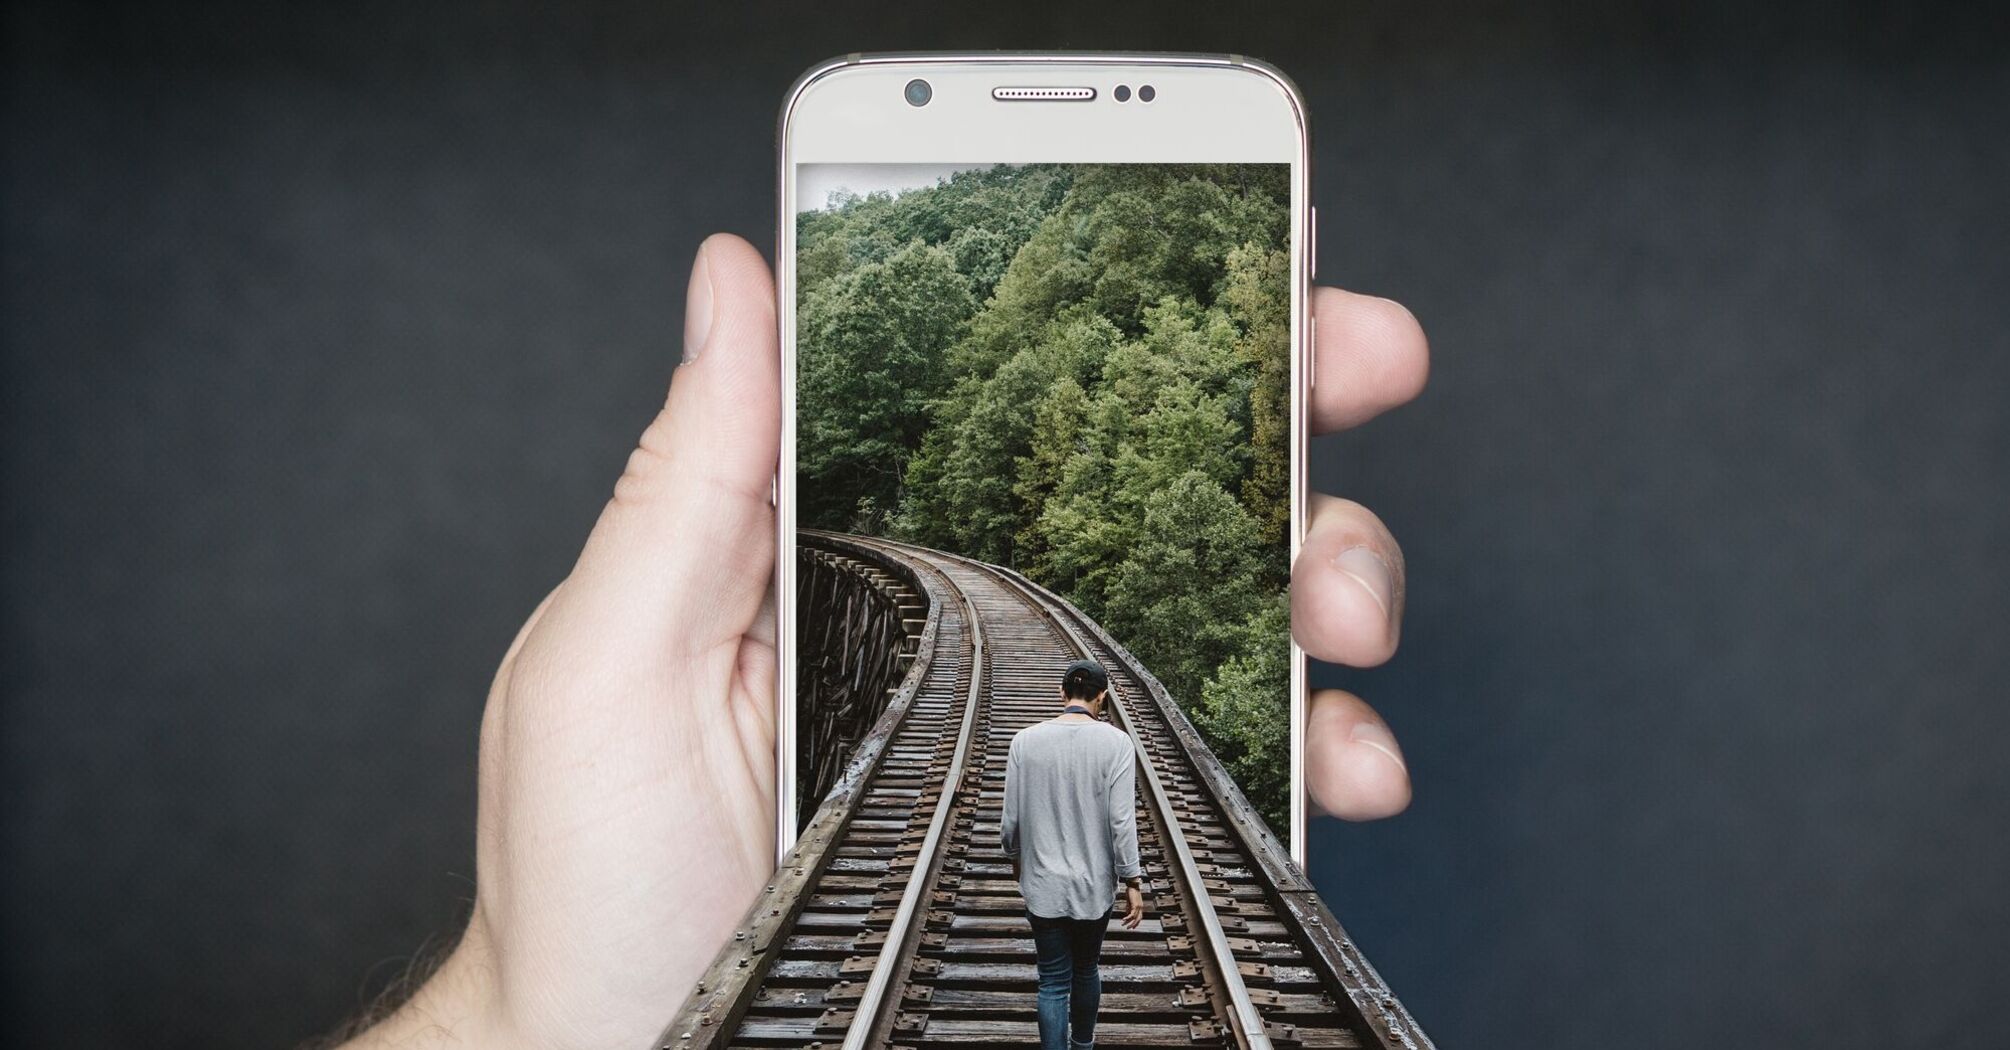 A man walking along a forested railway track, merging digital and physical realms of exploration